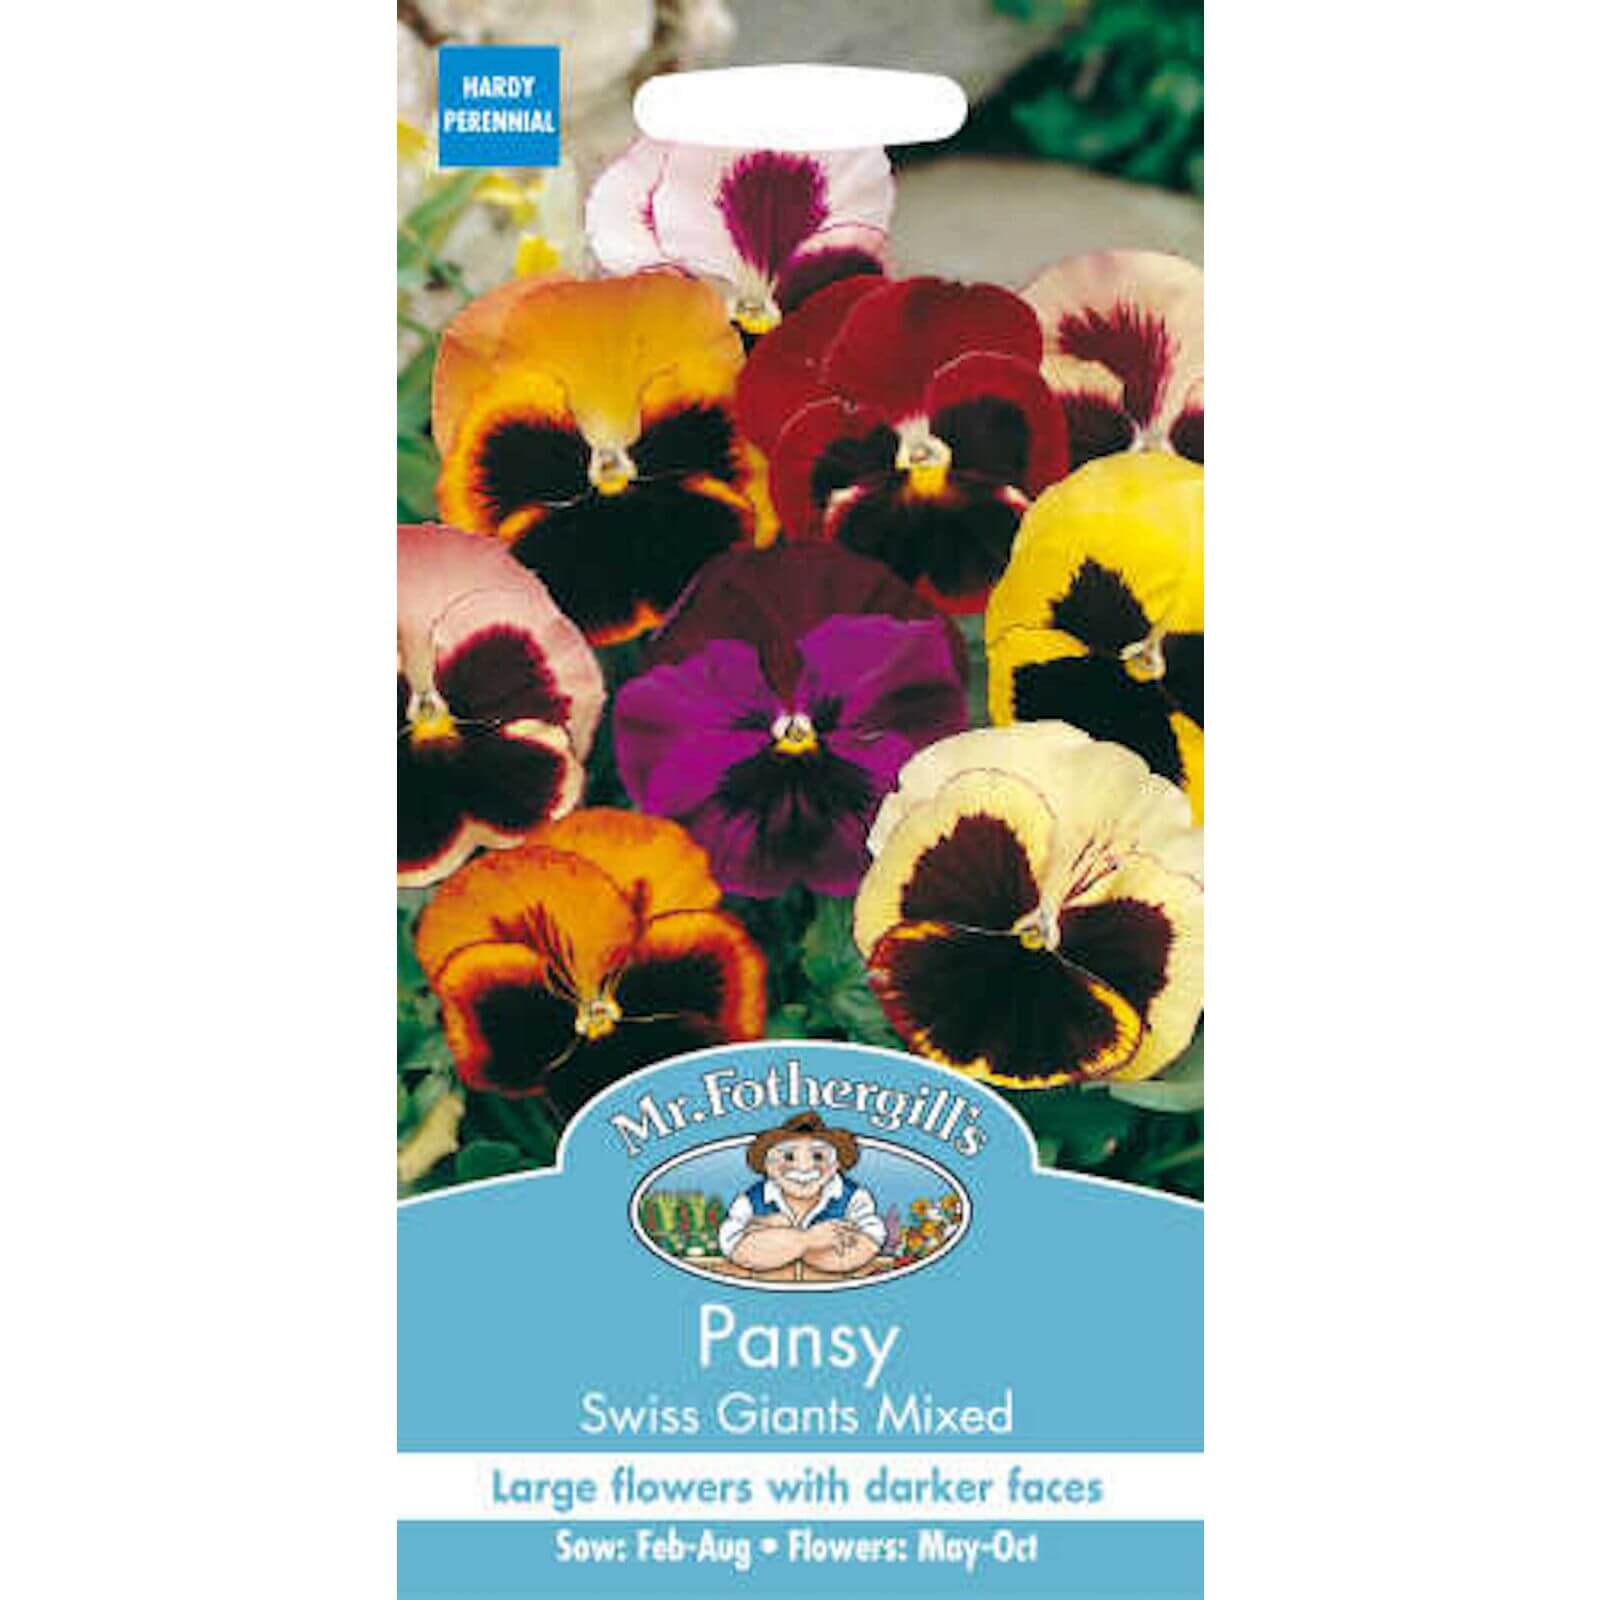 Mr. Fothergill's Pansy Swiss Giants Mixed (Viola X Wittrockina) Seeds